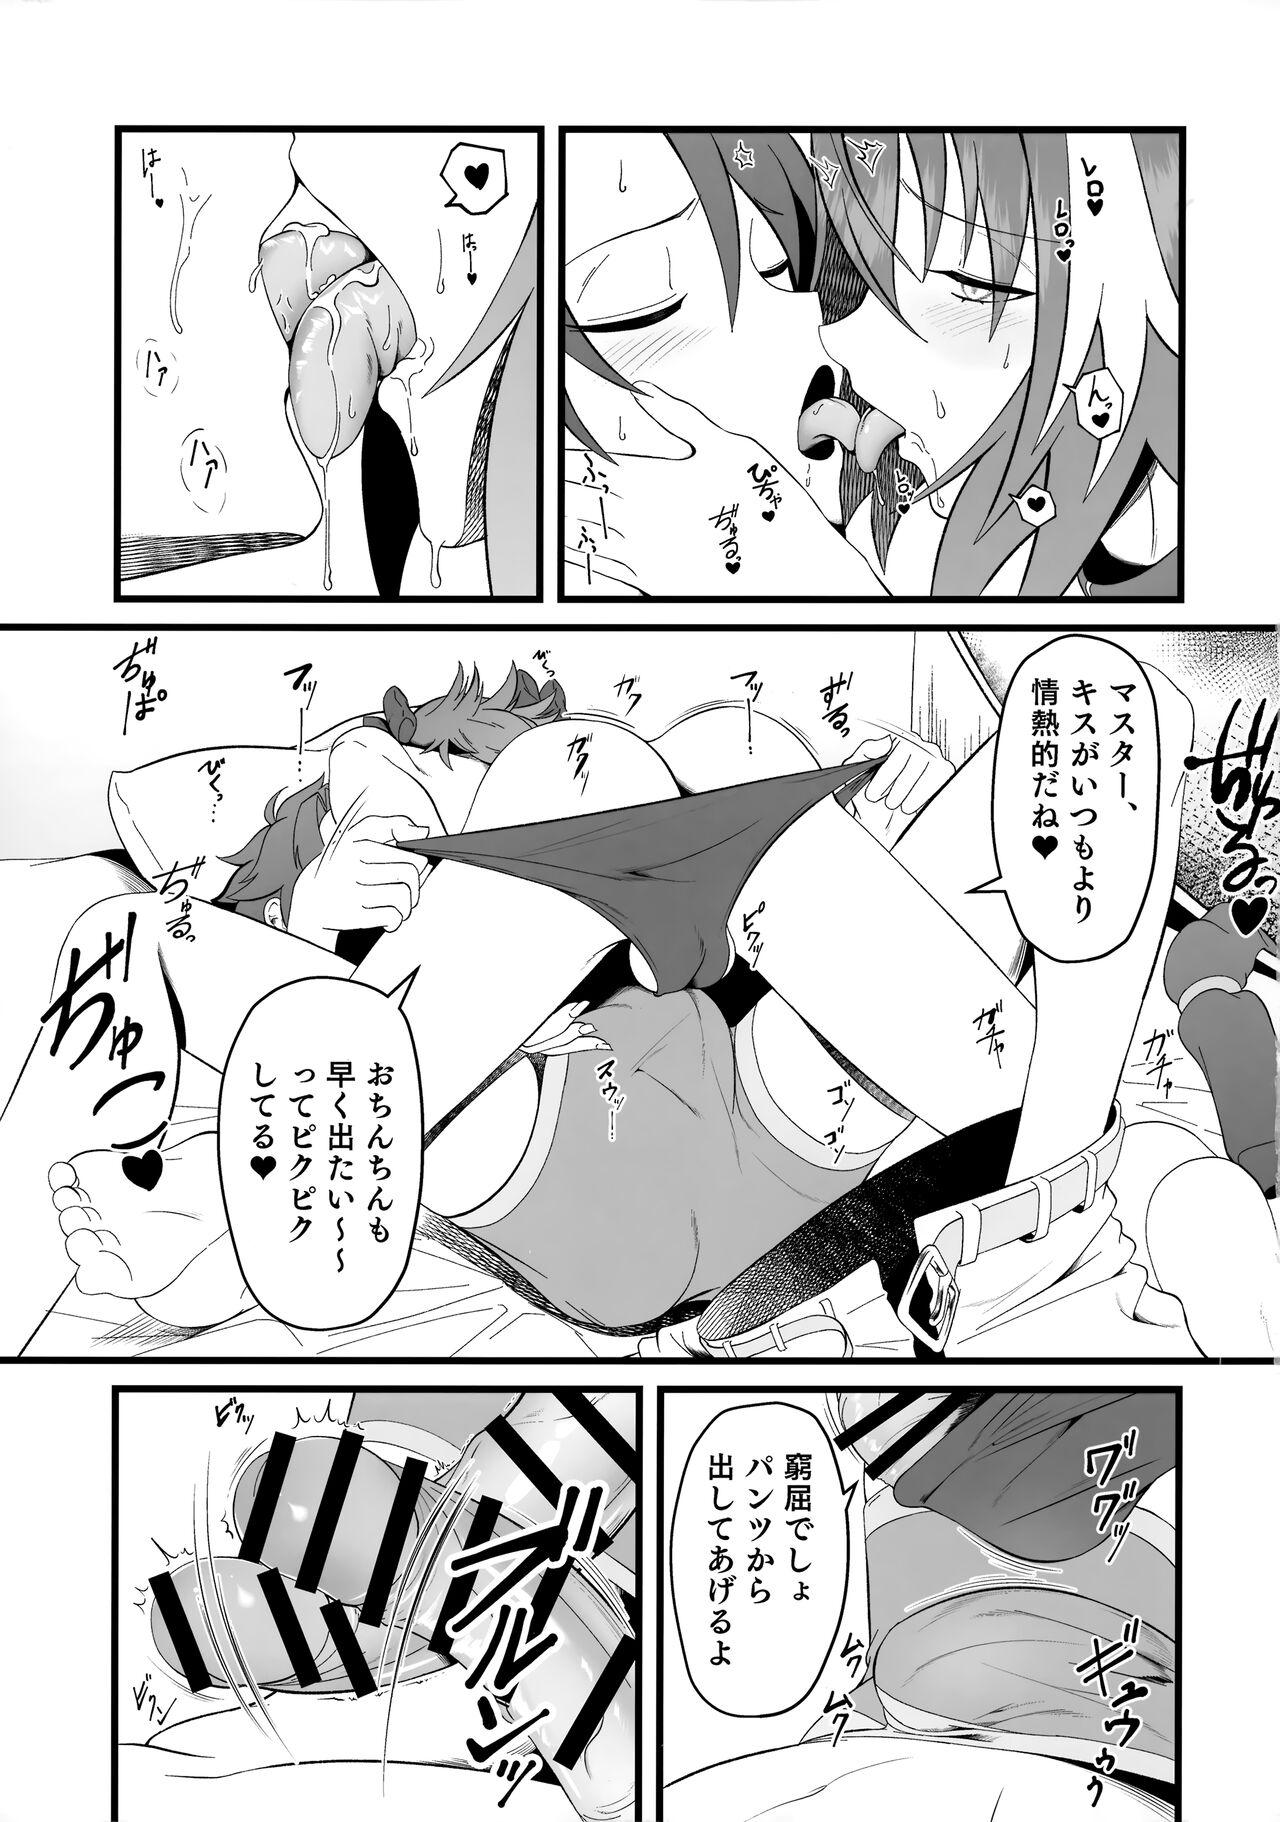 Family Porn Kimi no Ichiban ni Naritakute - I wanted to be your number one. - Fate grand order Bang Bros - Page 10